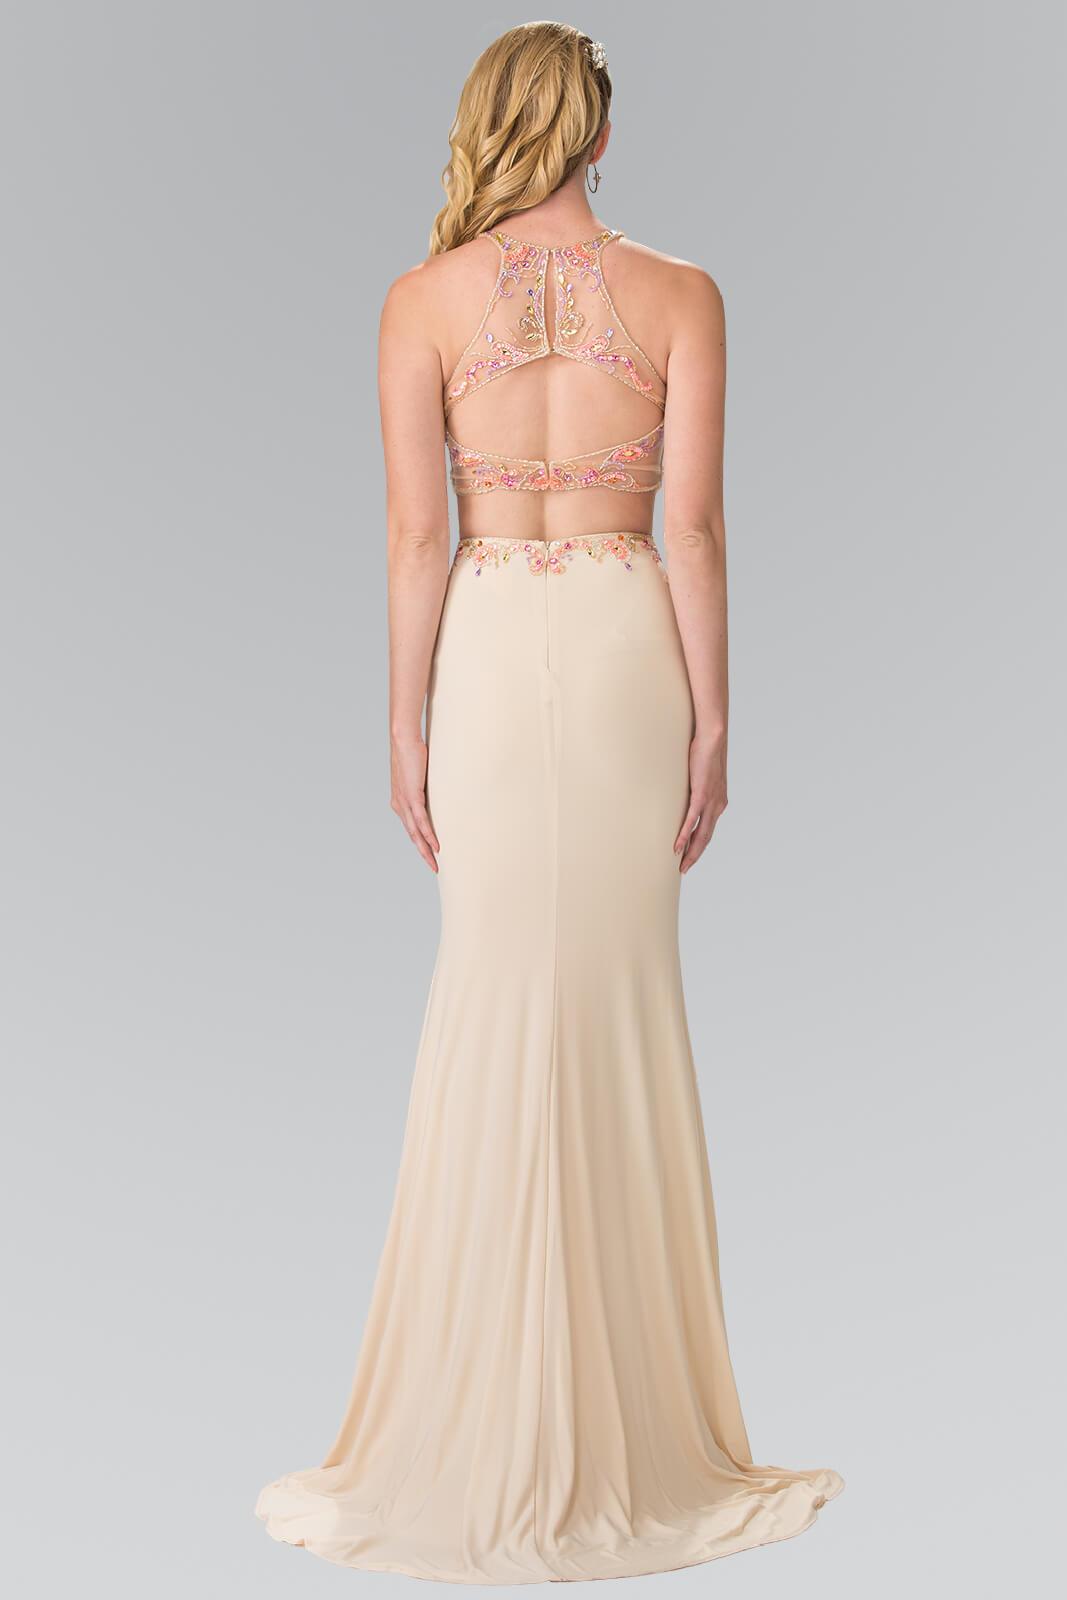 Prom 2 Piece Sexy Halter Evening Gown - The Dress Outlet Elizabeth K